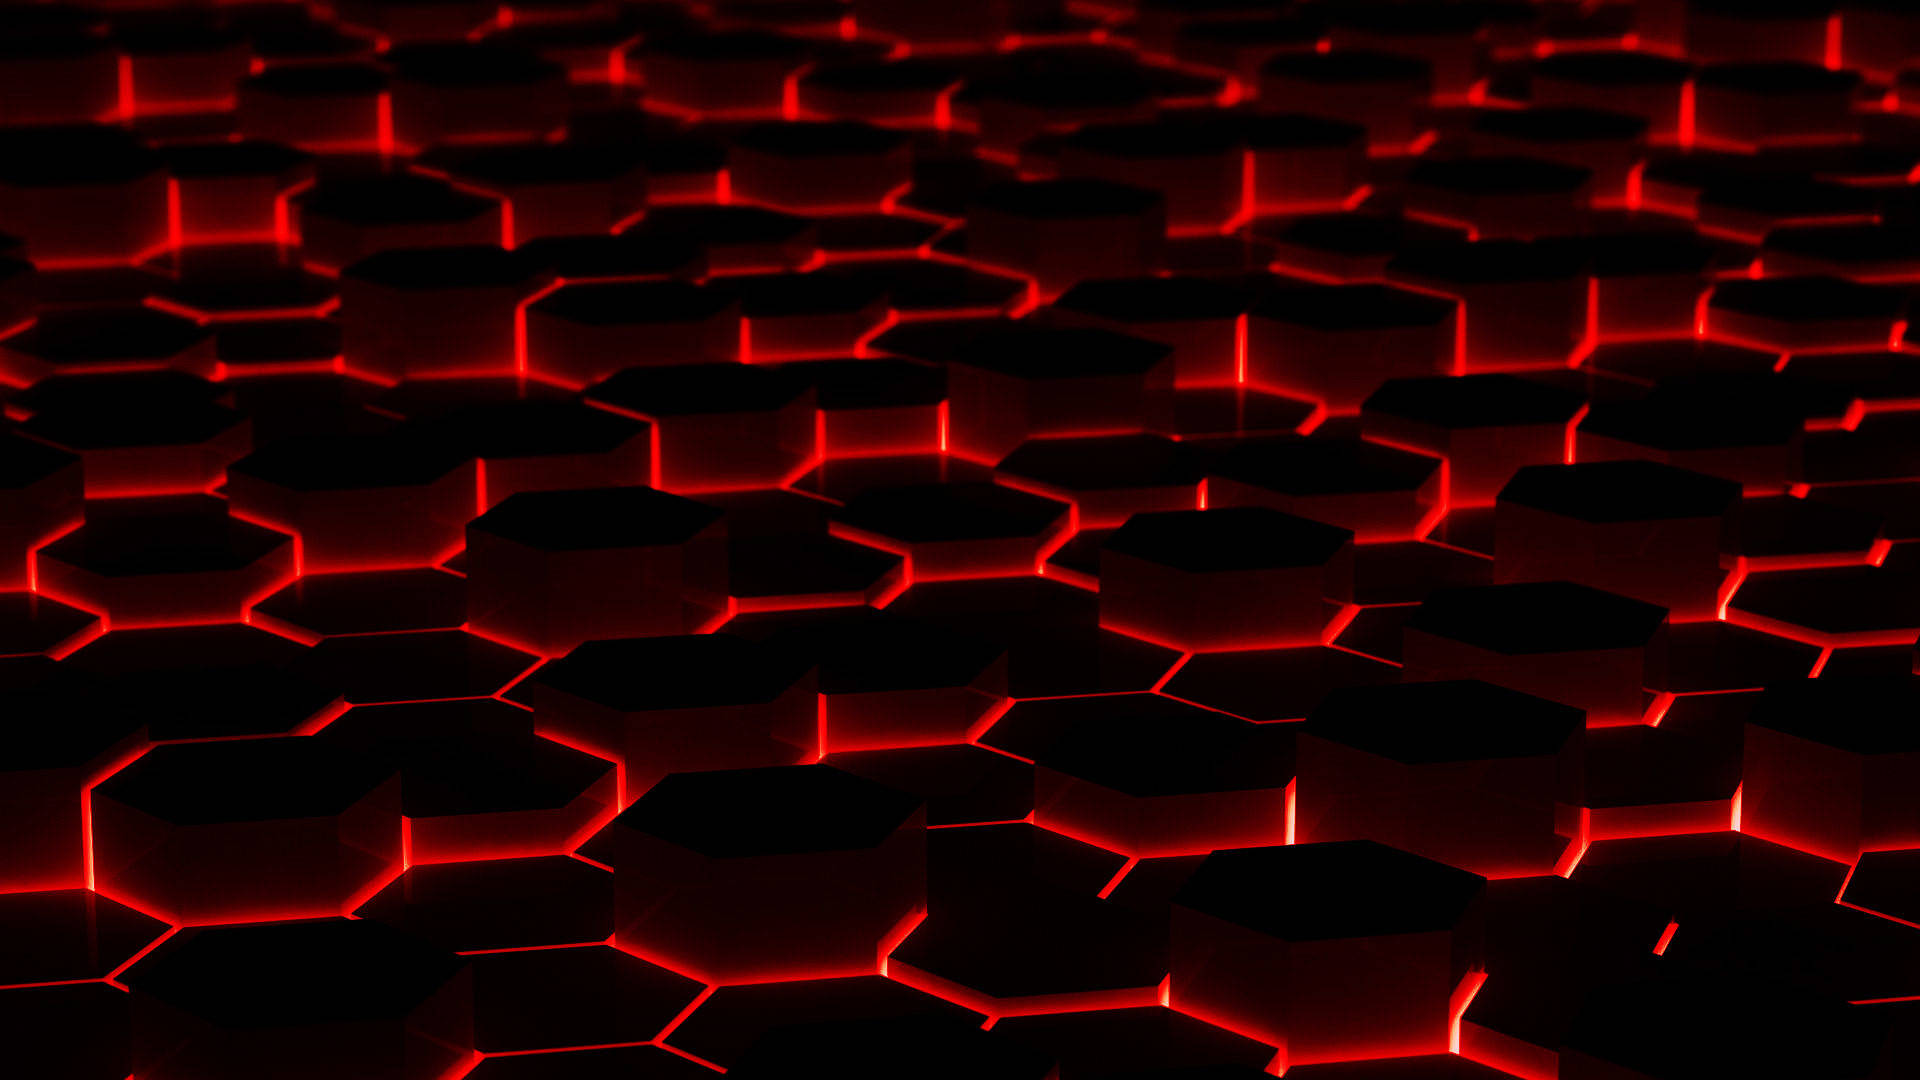 Red Backlight And Hexagons In Black Desktop Background